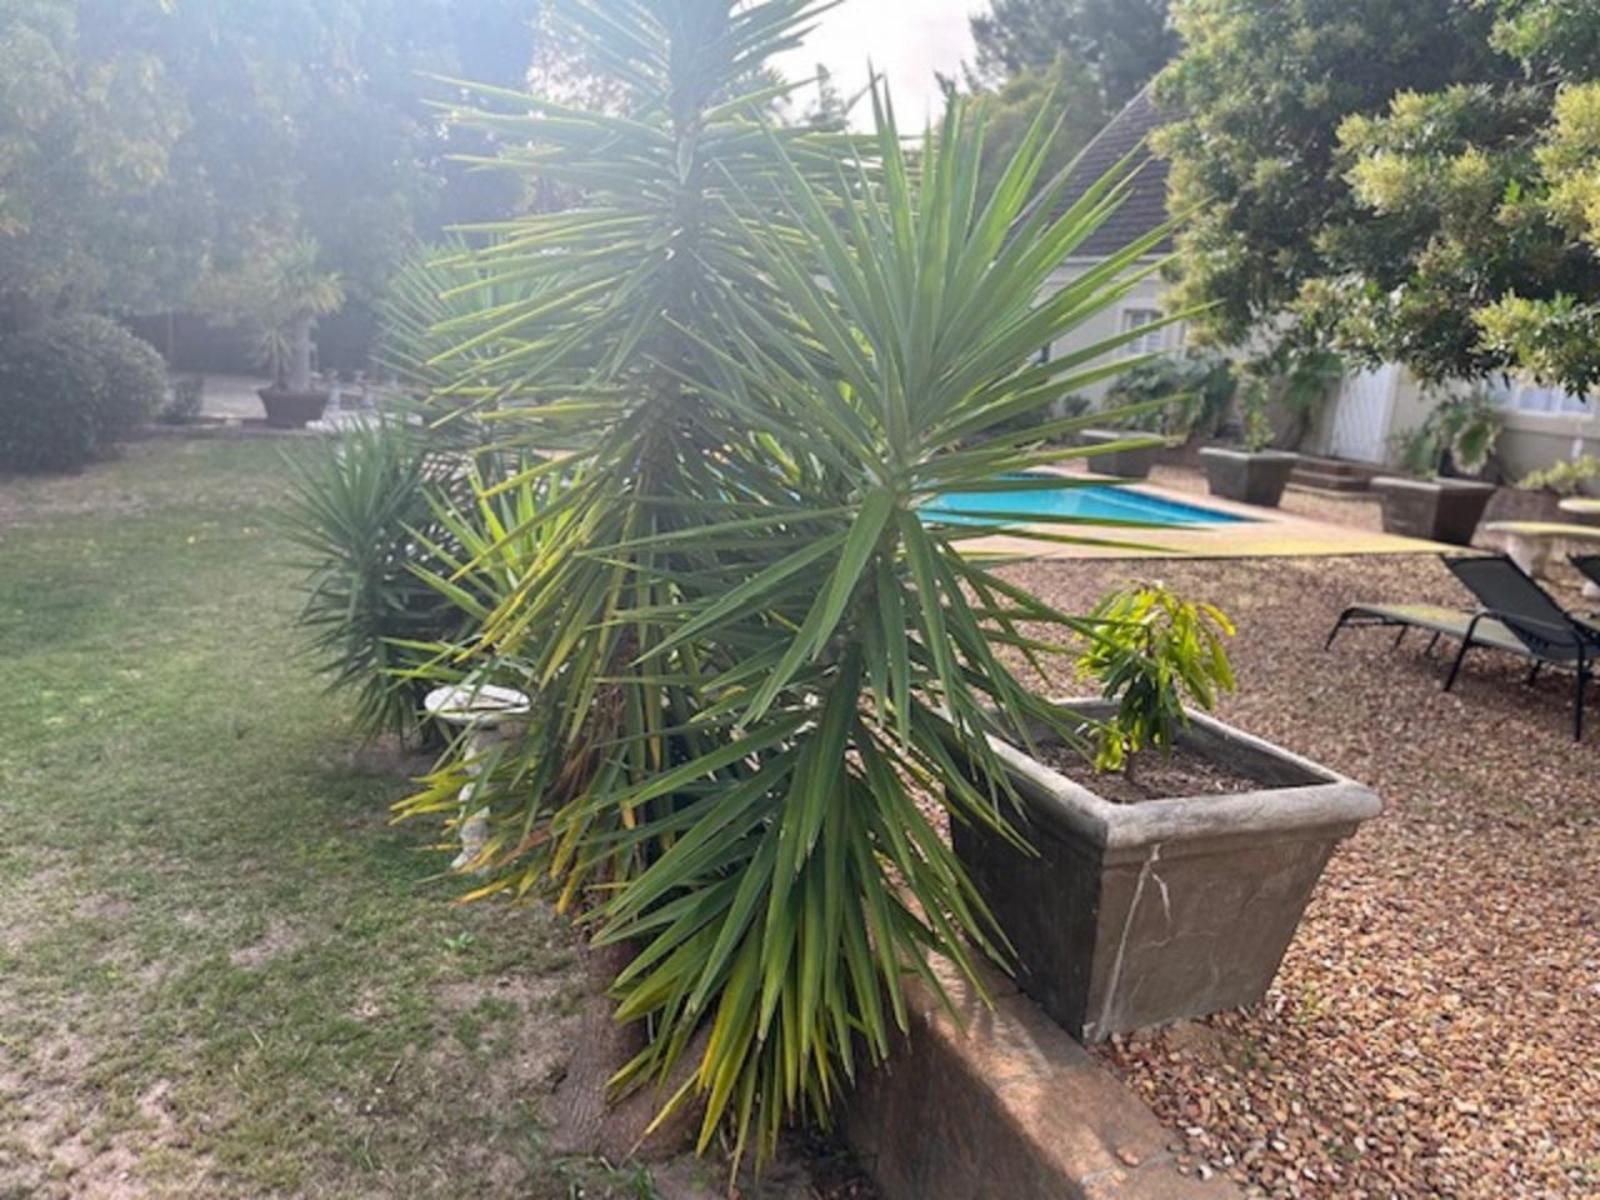 Guesthouse Summerlight Westridge Somerset West Somerset West Western Cape South Africa Palm Tree, Plant, Nature, Wood, Garden